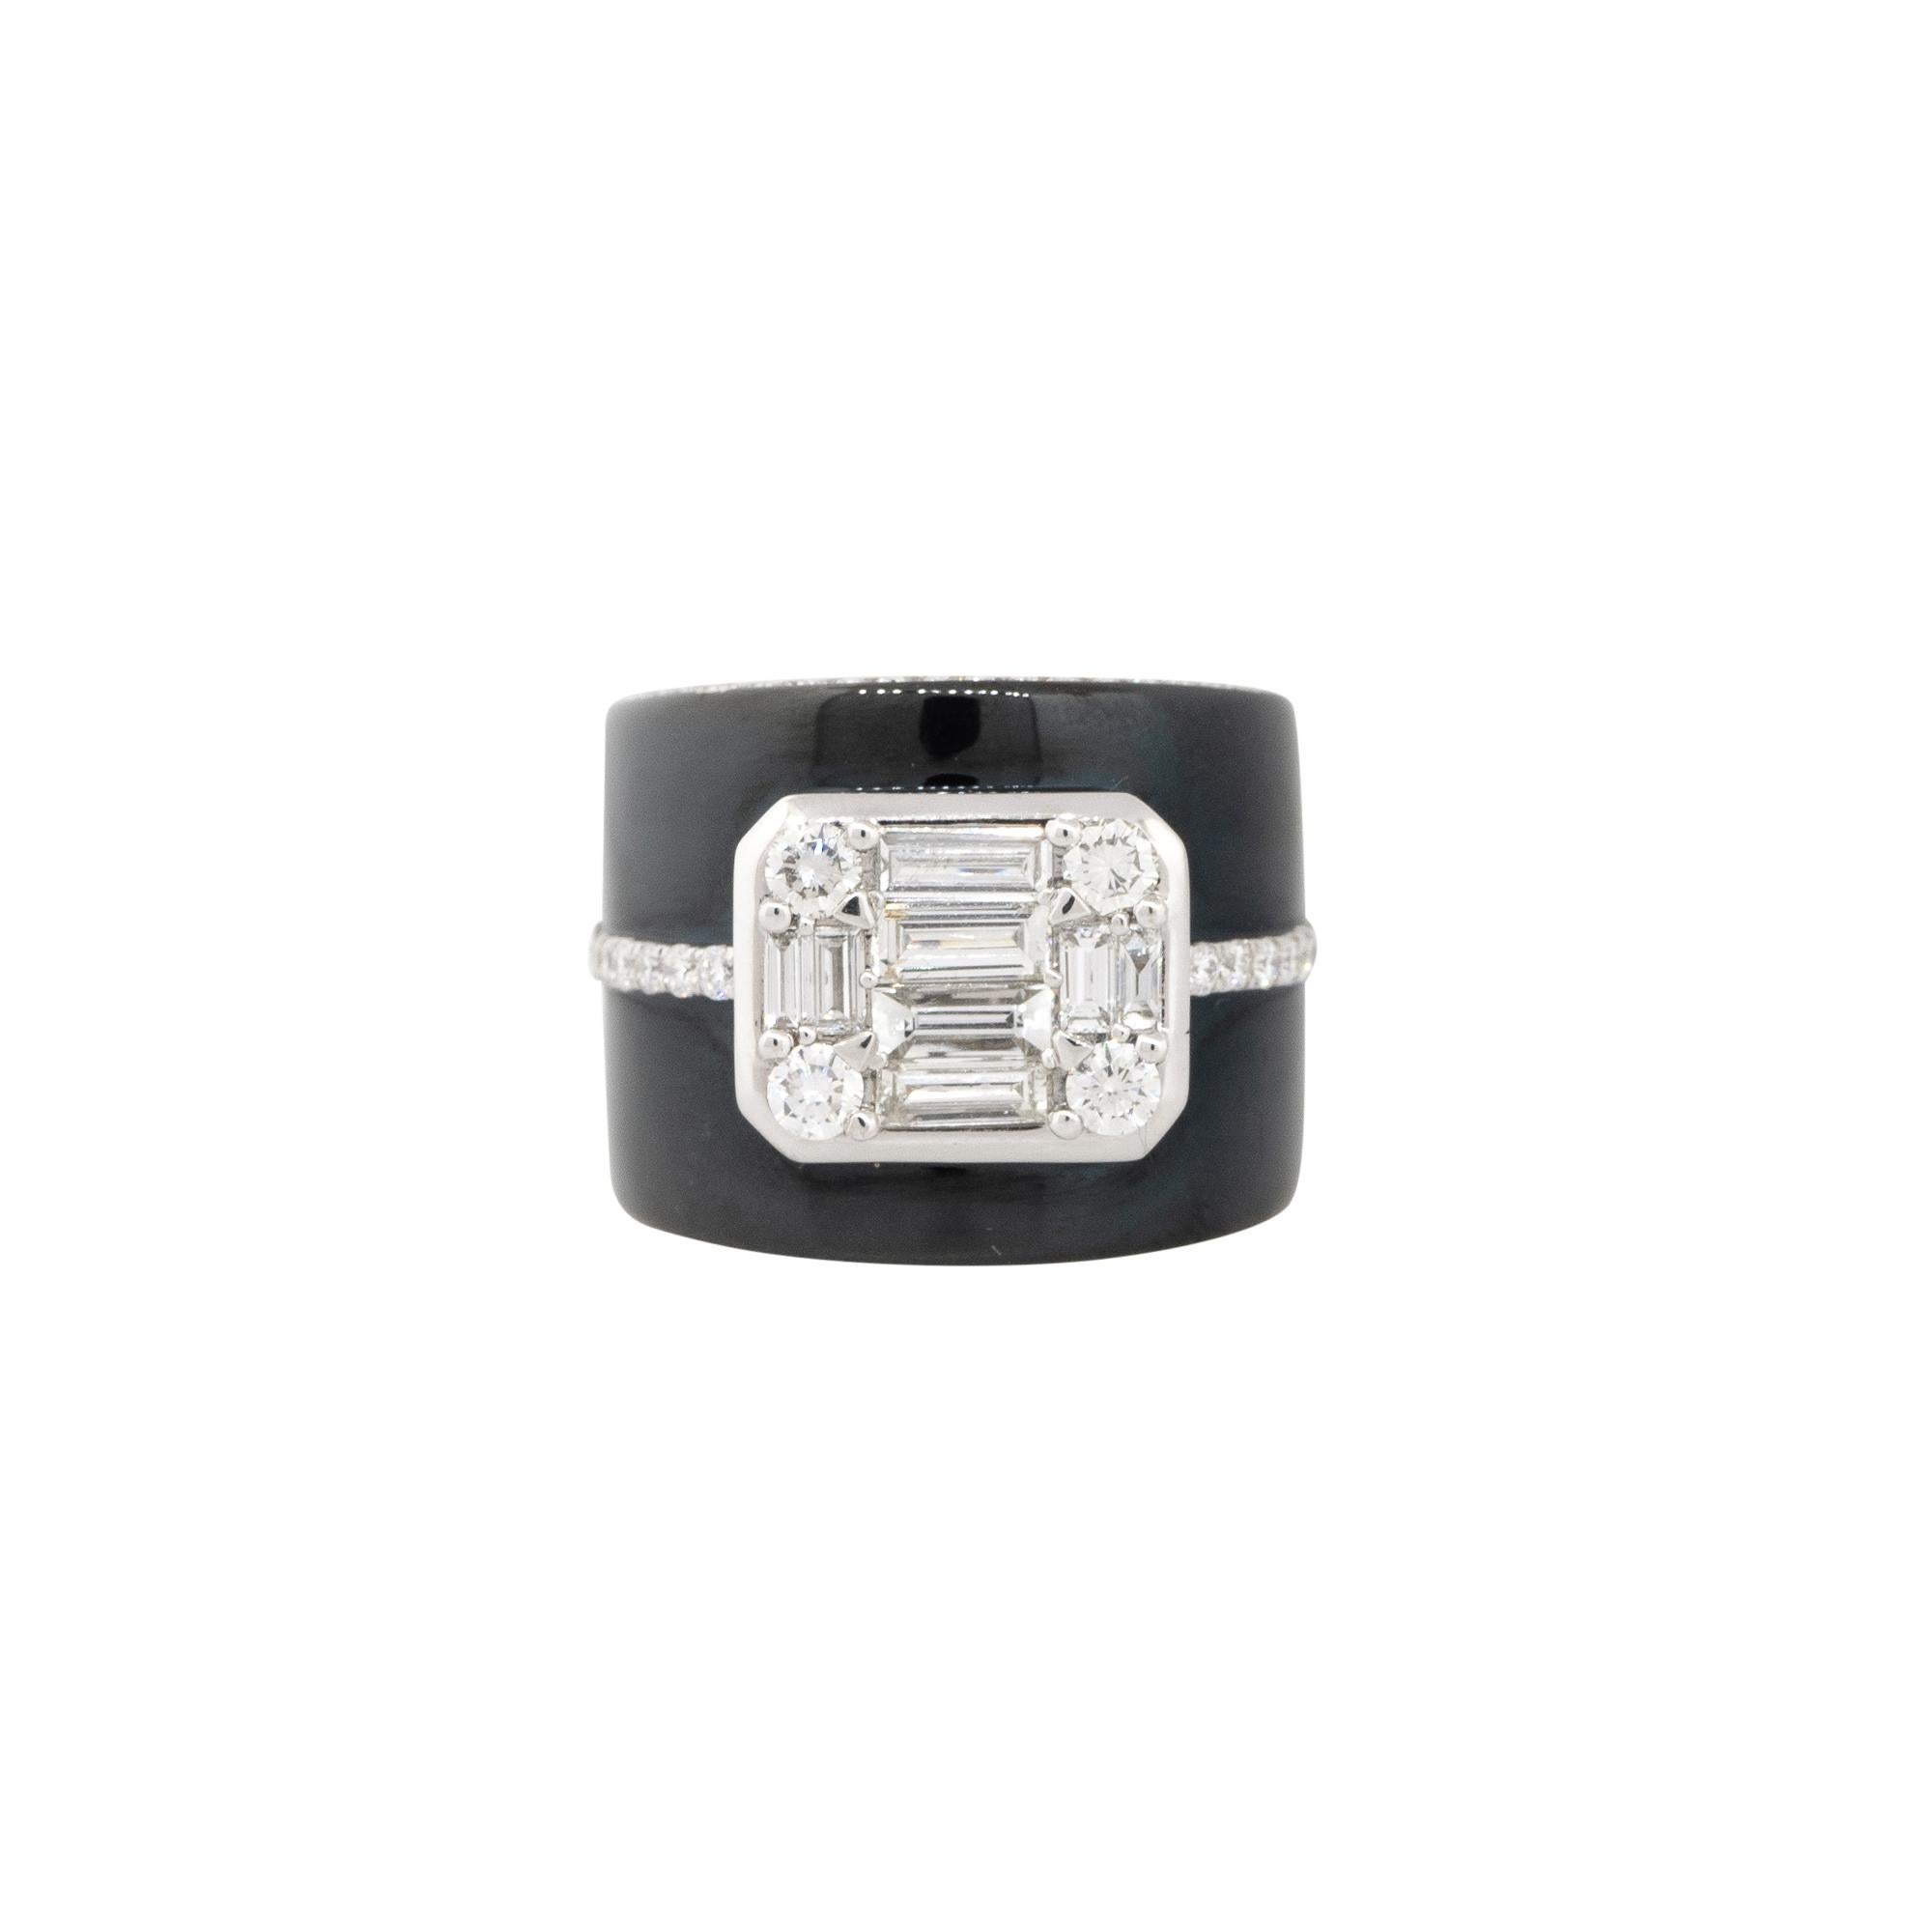 18k White Gold 1.83ctw Diamond and Black Enamel Mosaic Wide Band
Style: Women's Diamond Enamel Ring
Material: 18k White Gold
Main Diamond Details: Approximately 1.83ctw of Mosaic set, Baguette and Round Brilliant Cut Diamonds. There are 72 stones